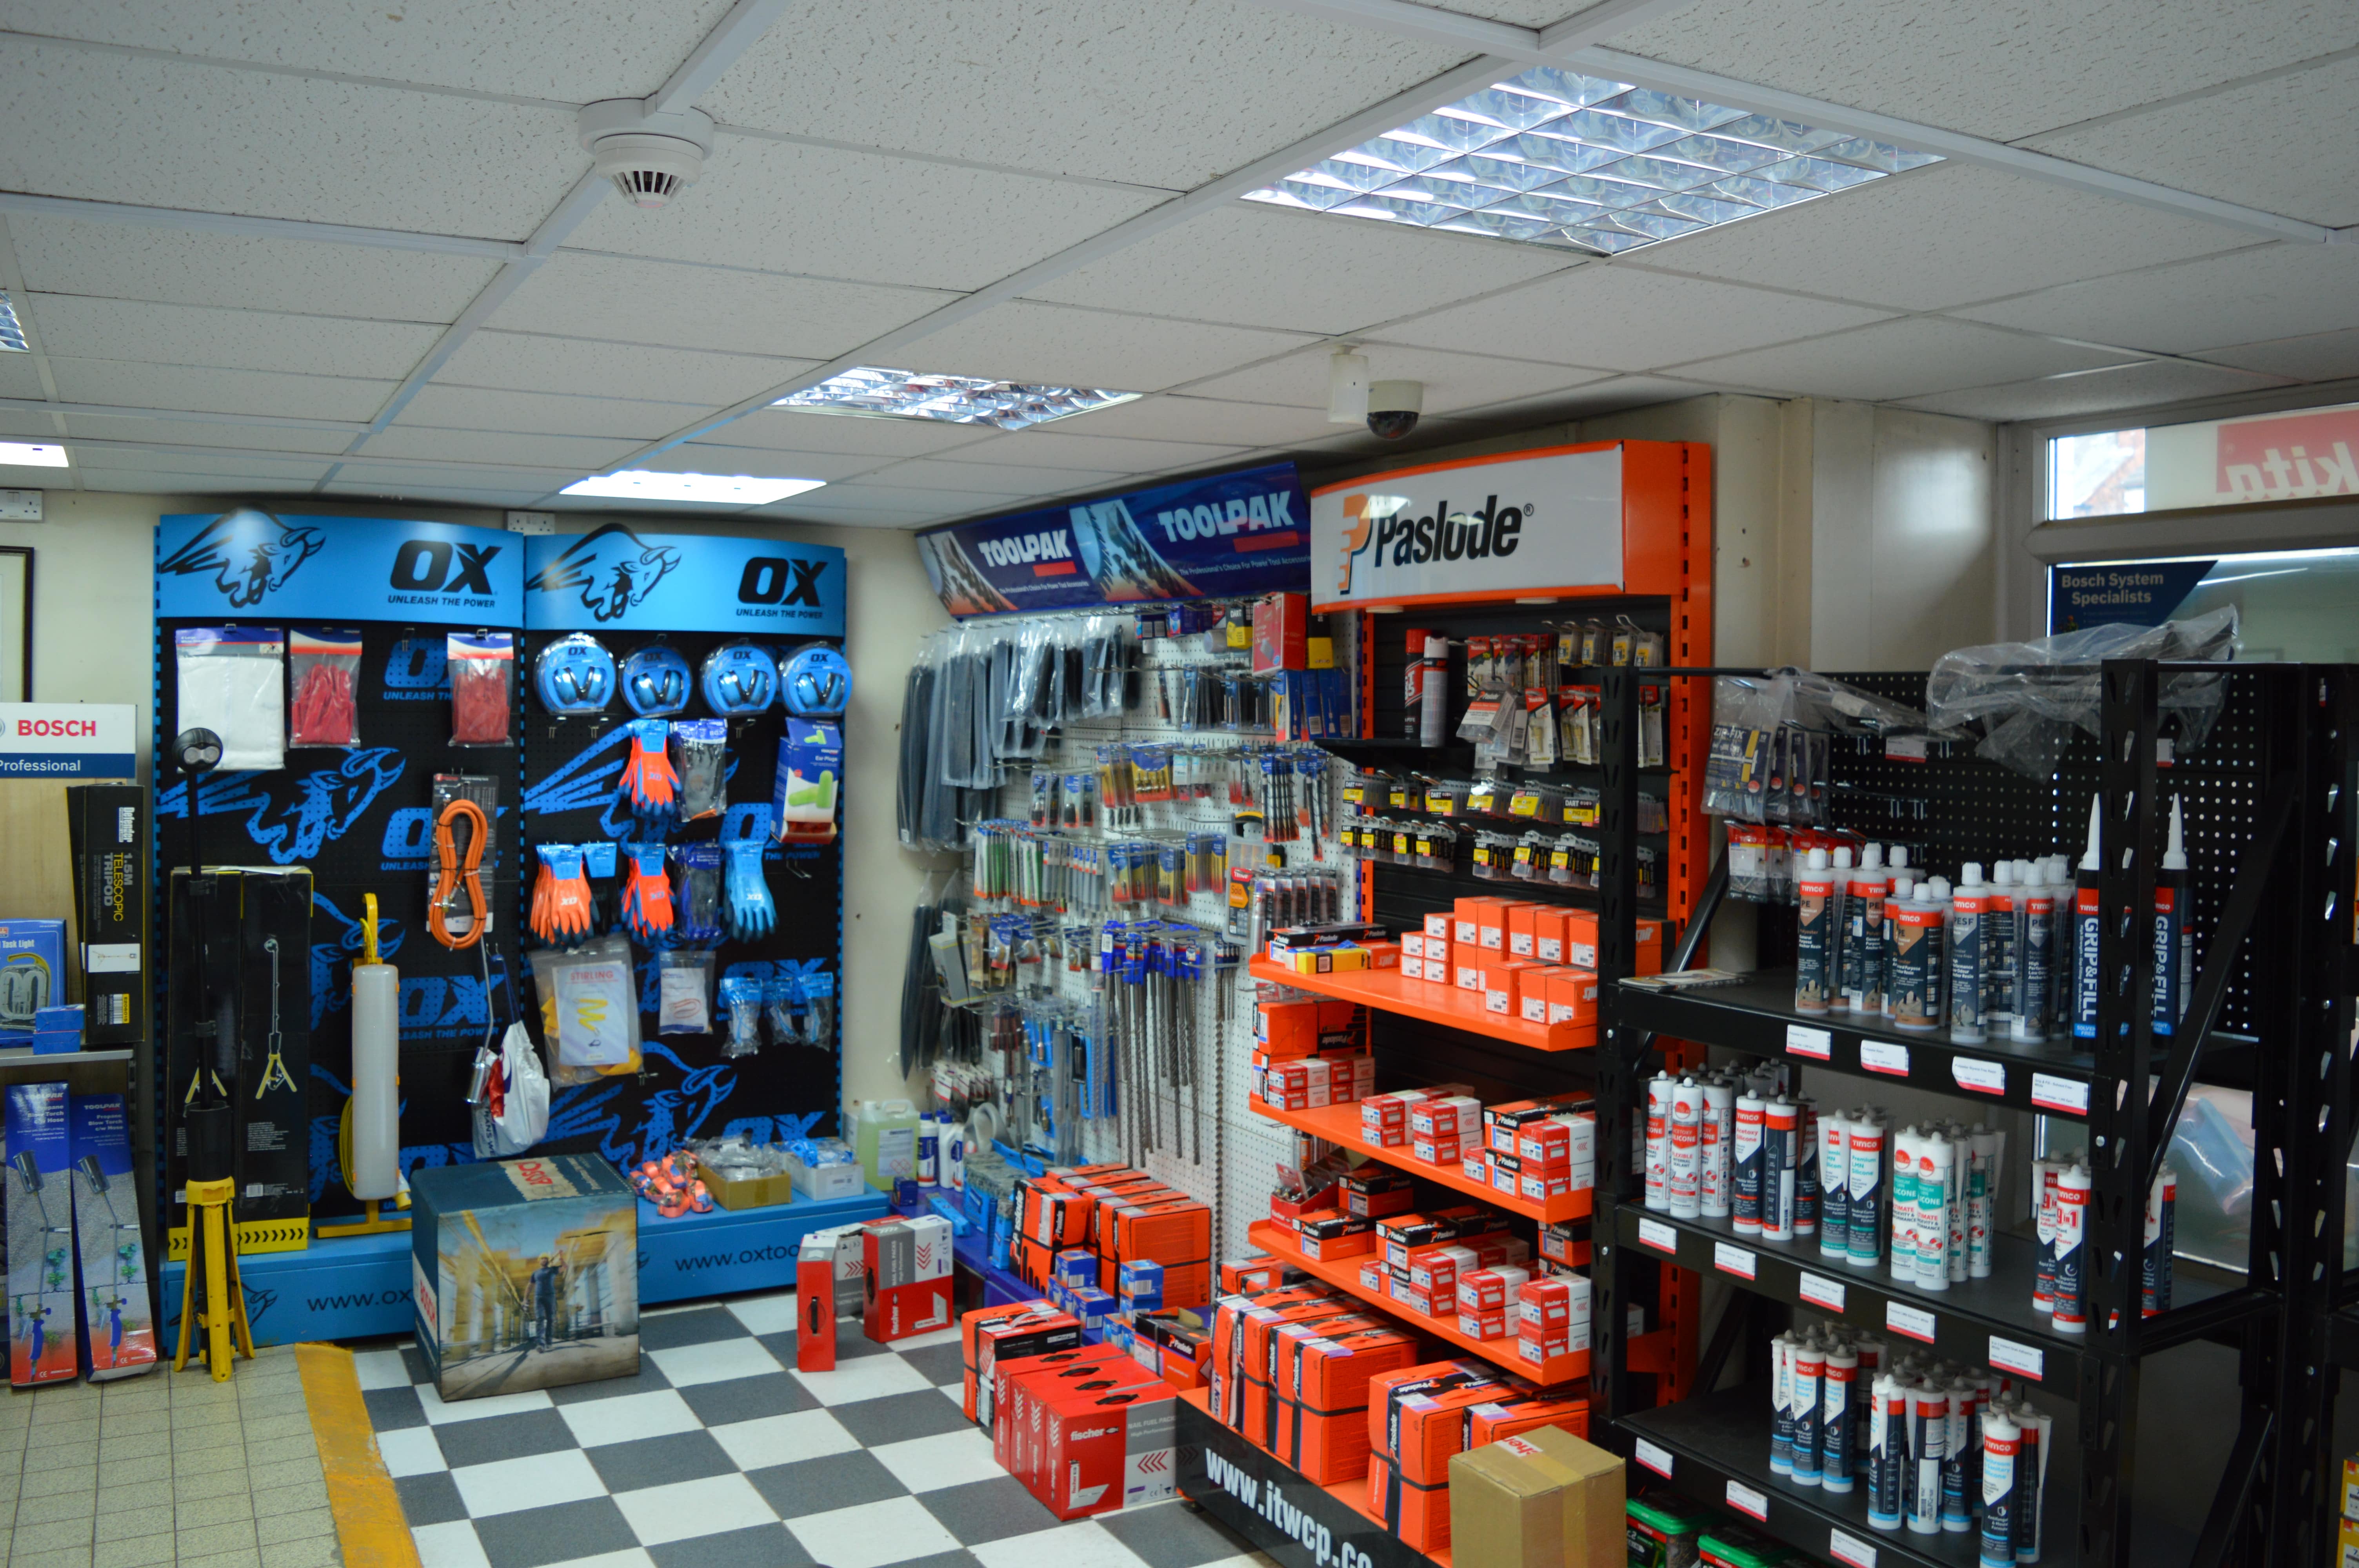 Products for Sale at Tool Hire Daybrook